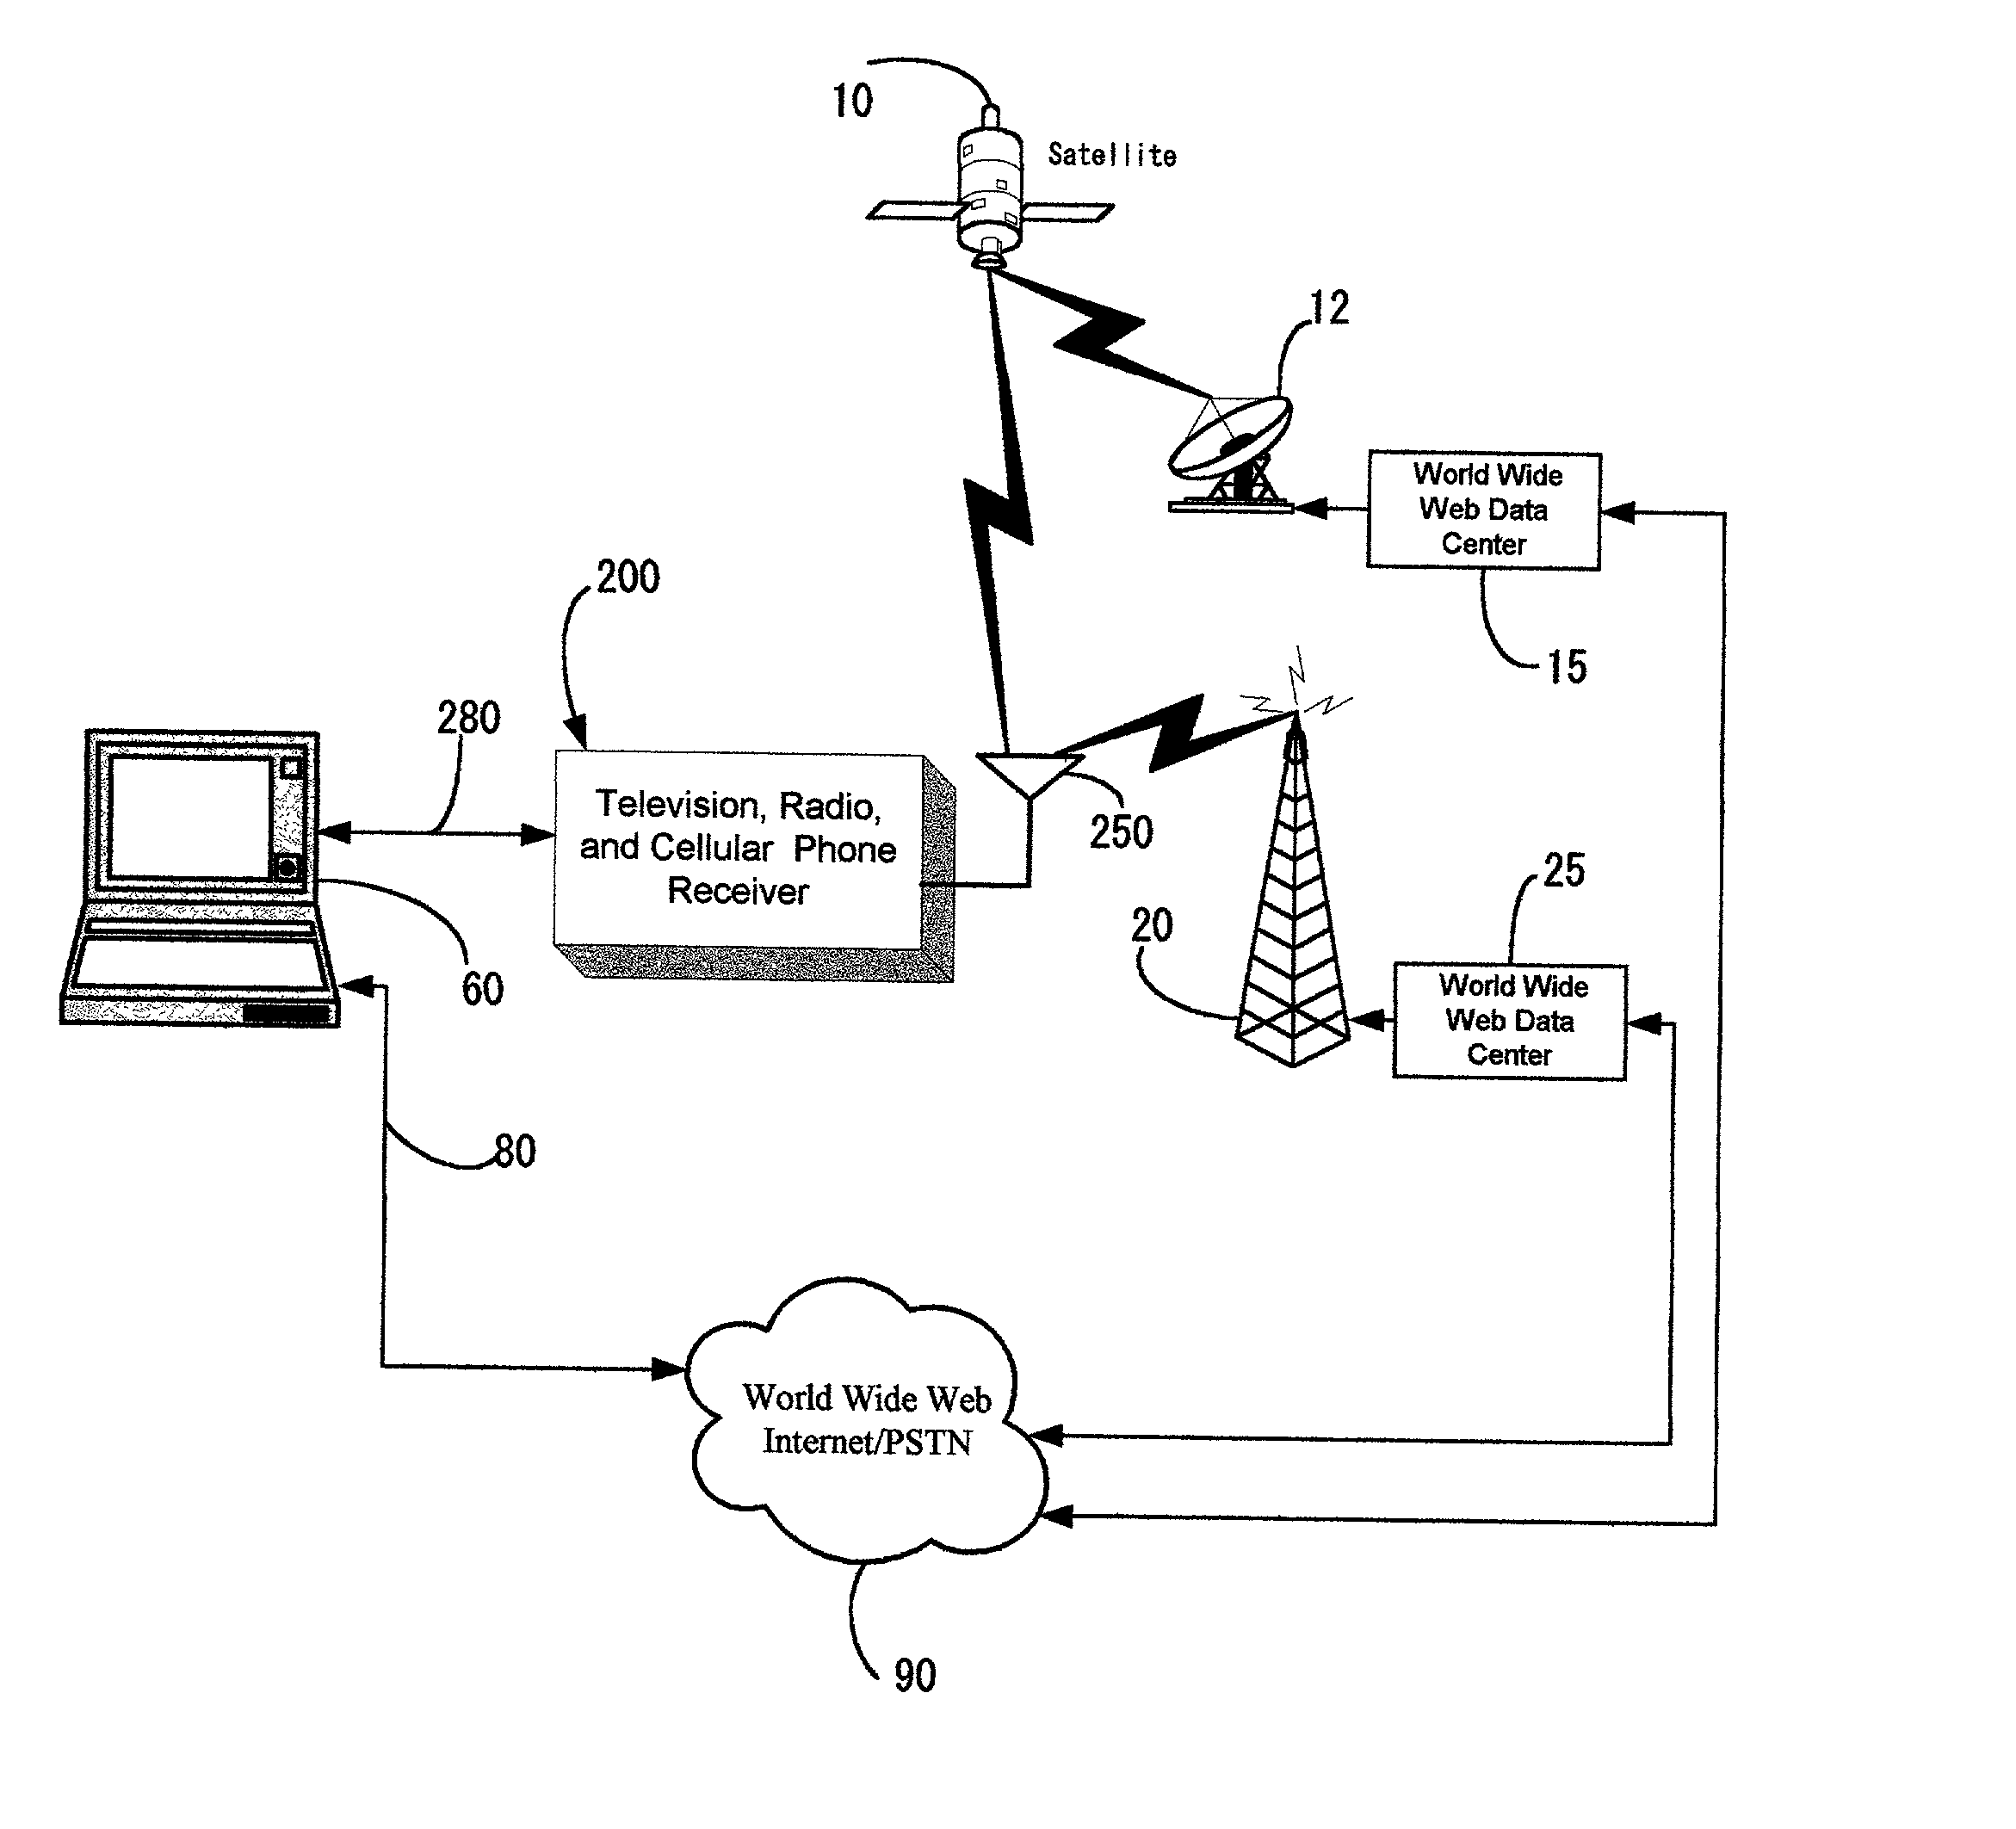 Multimedia display system using display unit of portable computer, and signal receiver for television, radio, and wireless telephone